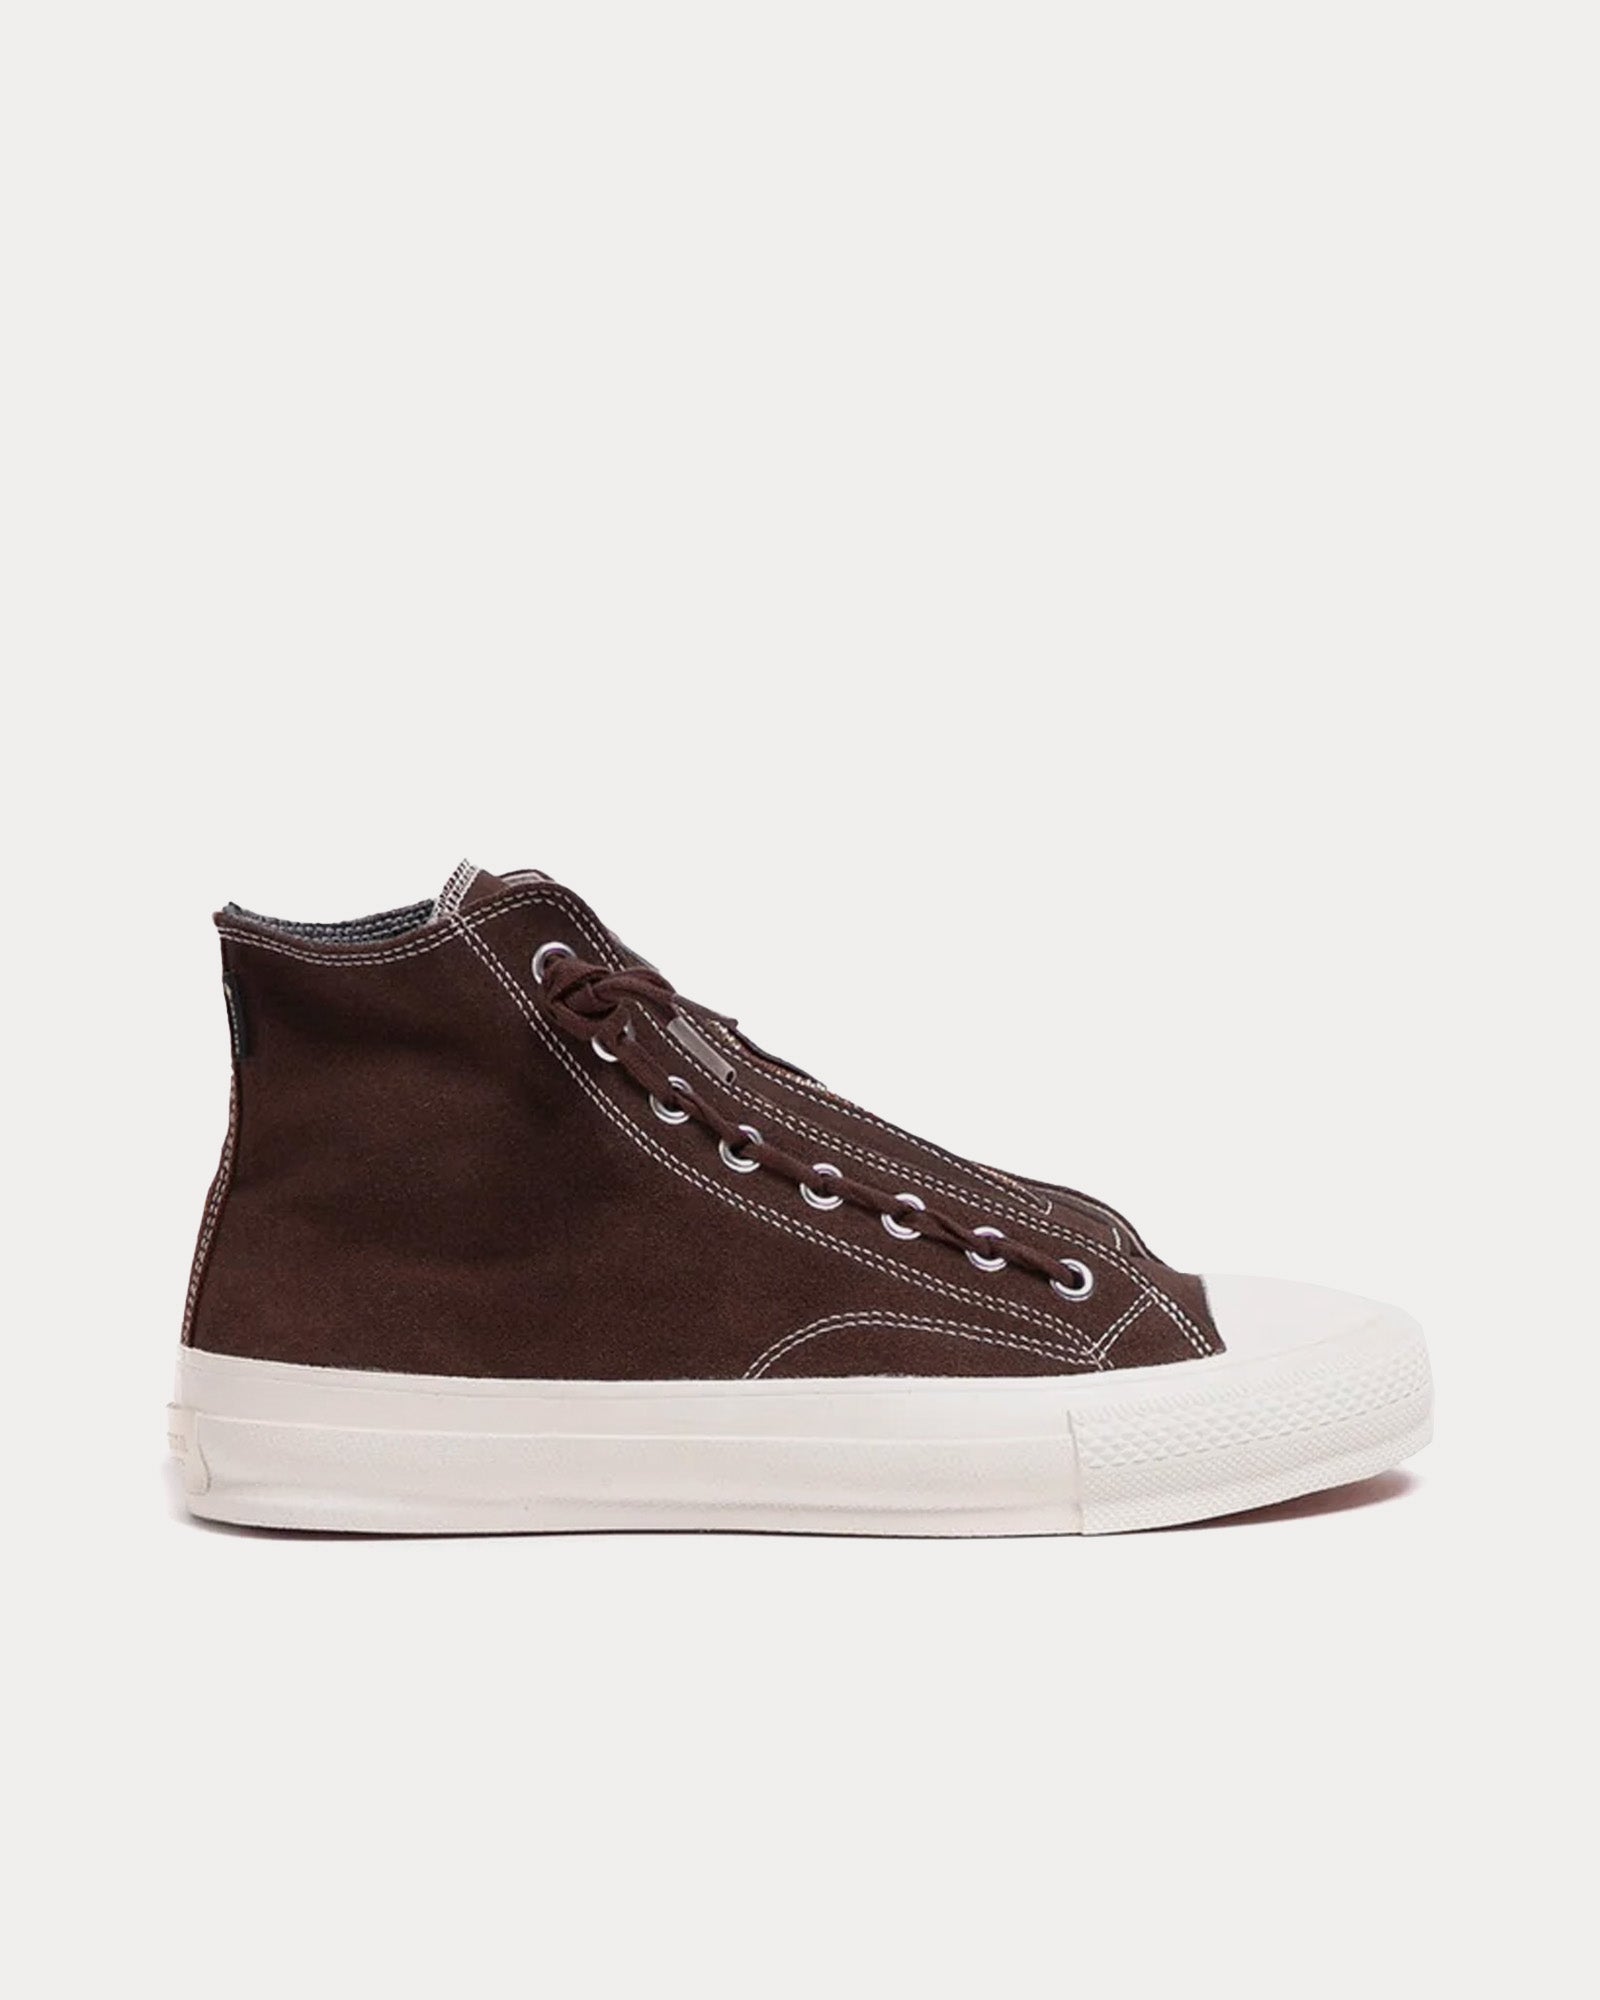 Nonnative - Dweller Hi Cow Leather with Gore-Tex Brown / White High Top Sneakers